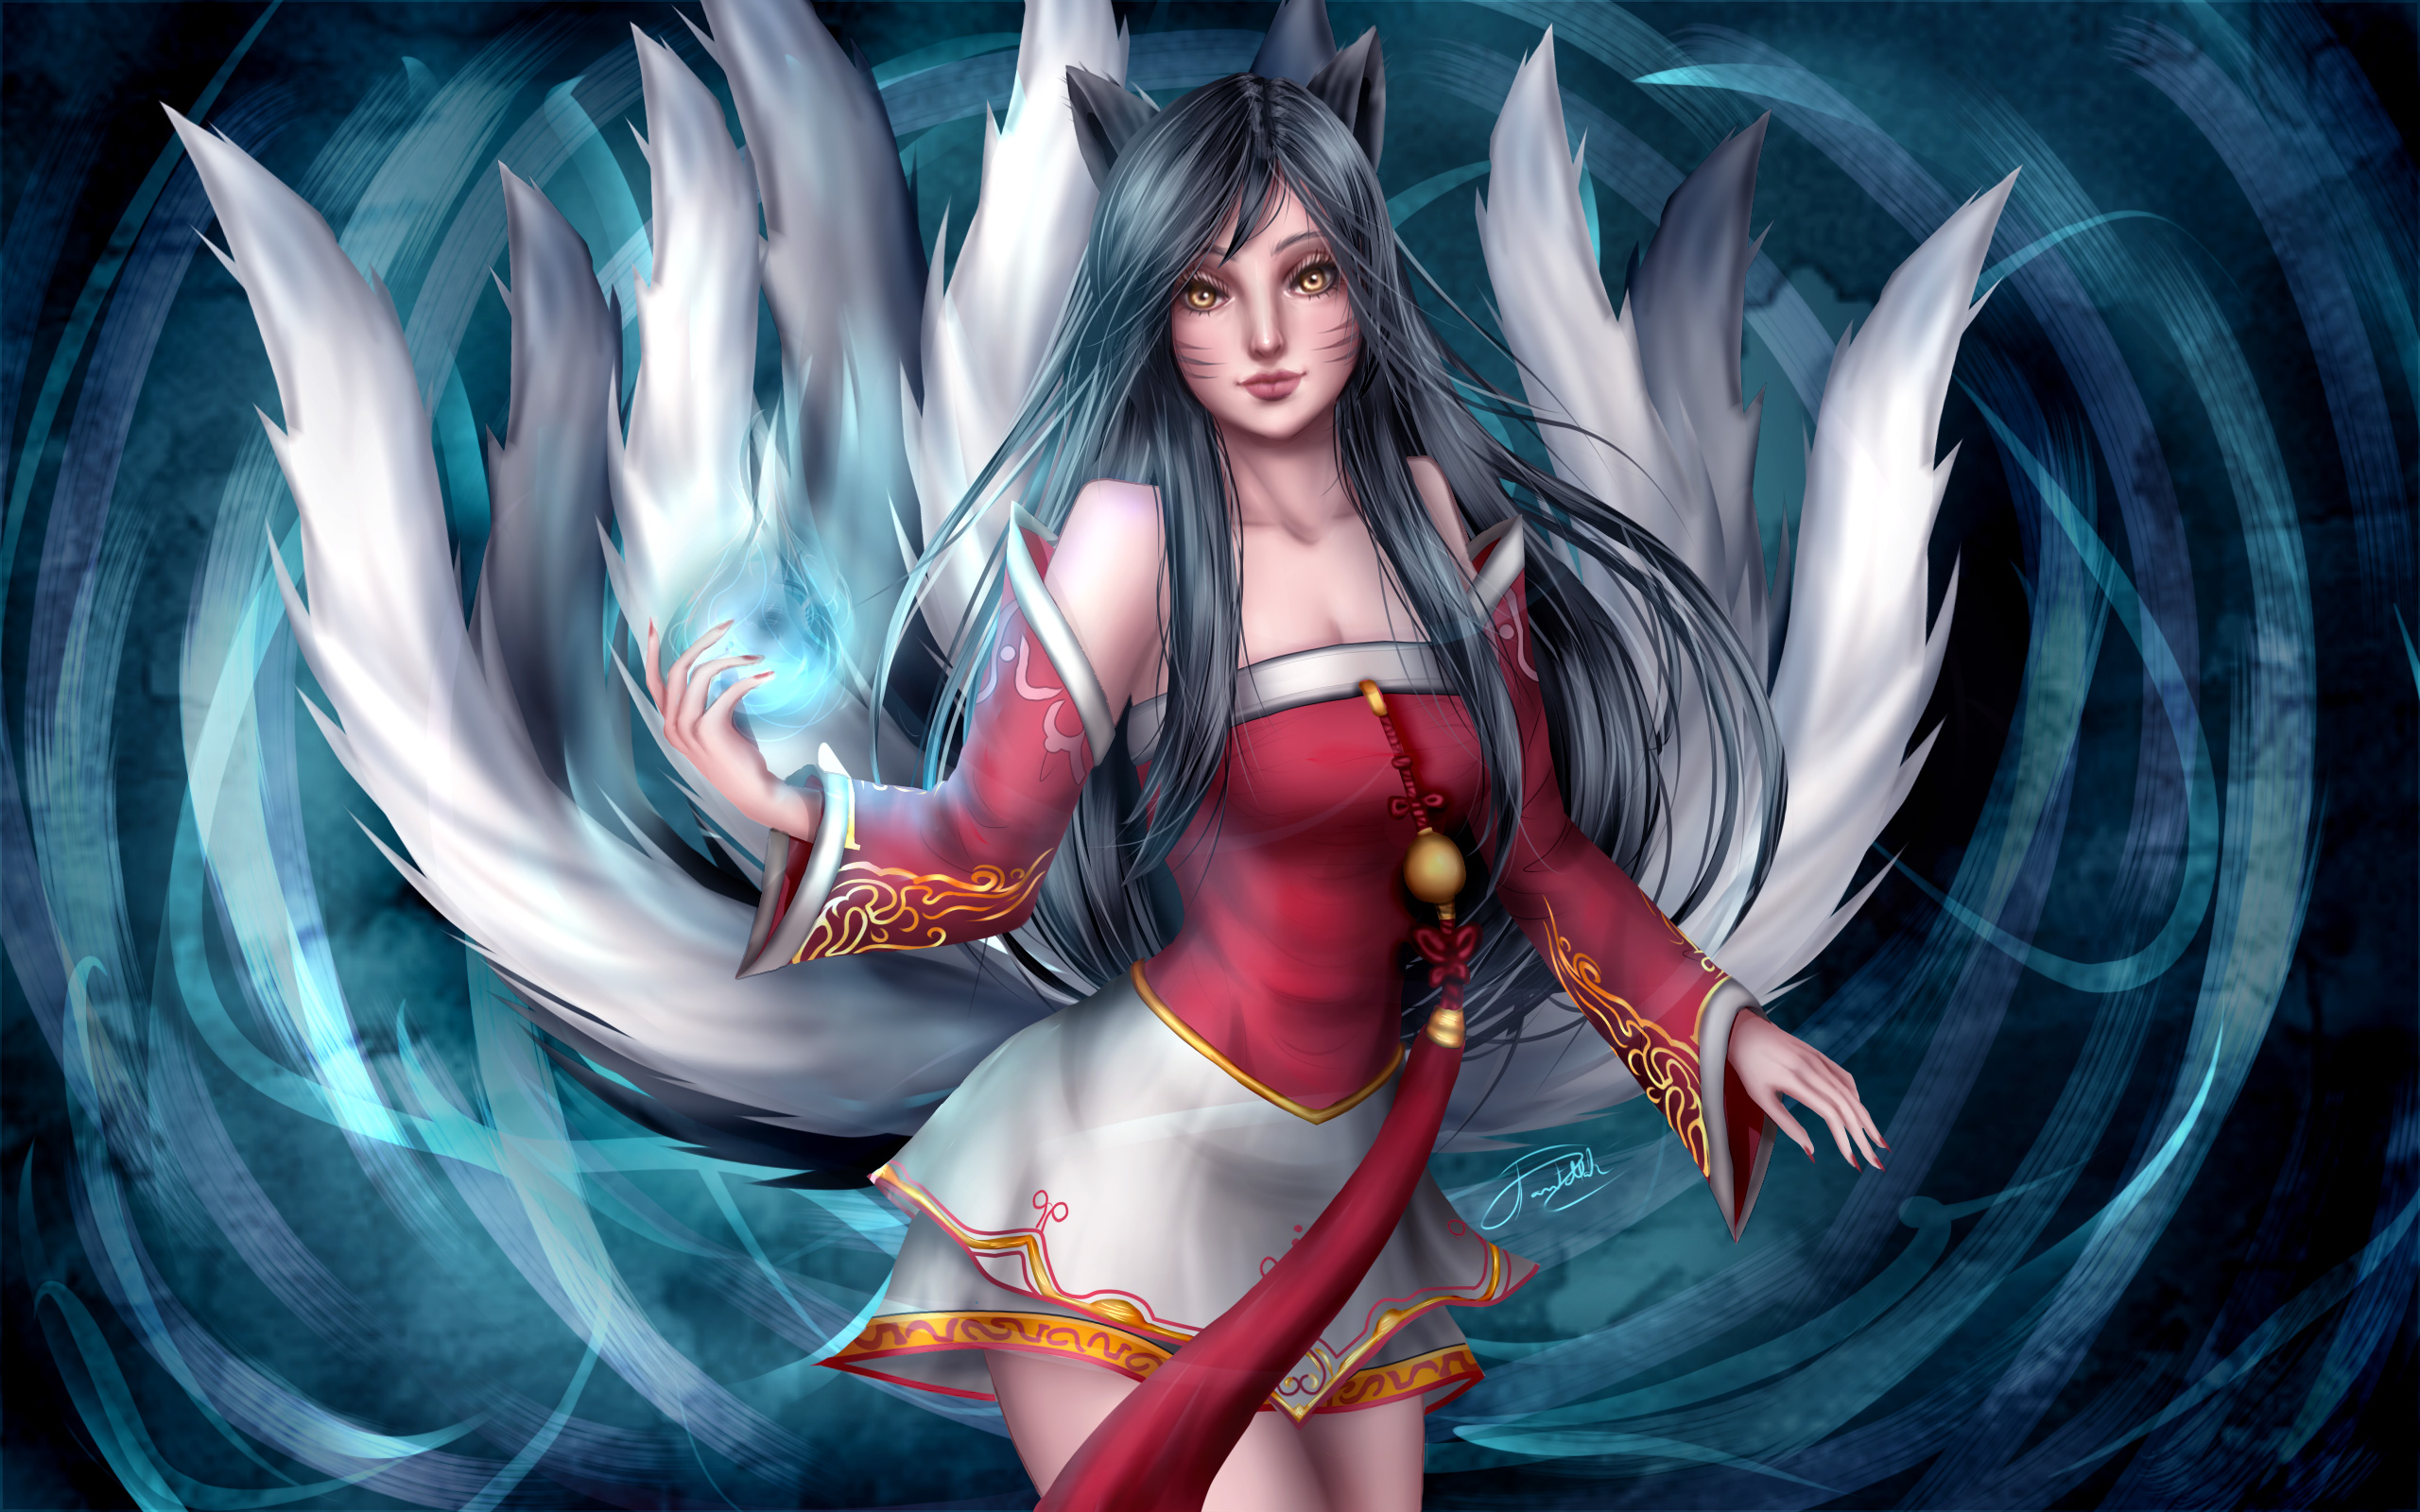 Join the discussion about Ahri on the League of Legends subreddit, where players share tips, fan art, and more.
10. Ahri - League of Legends - DeviantArt - wide 8